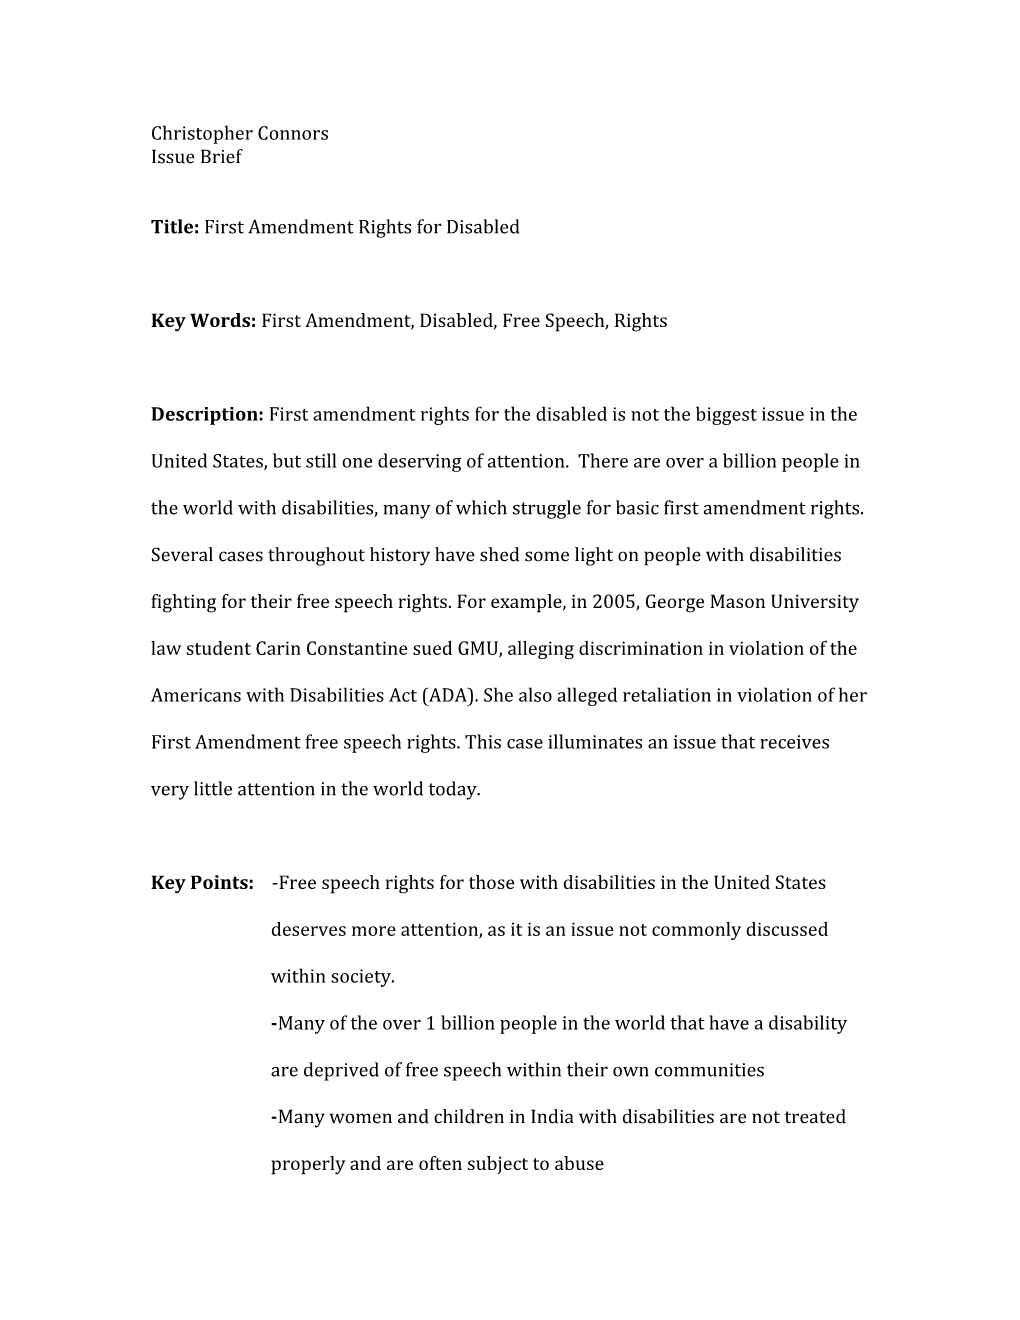 Title: First Amendment Rights for Disabled